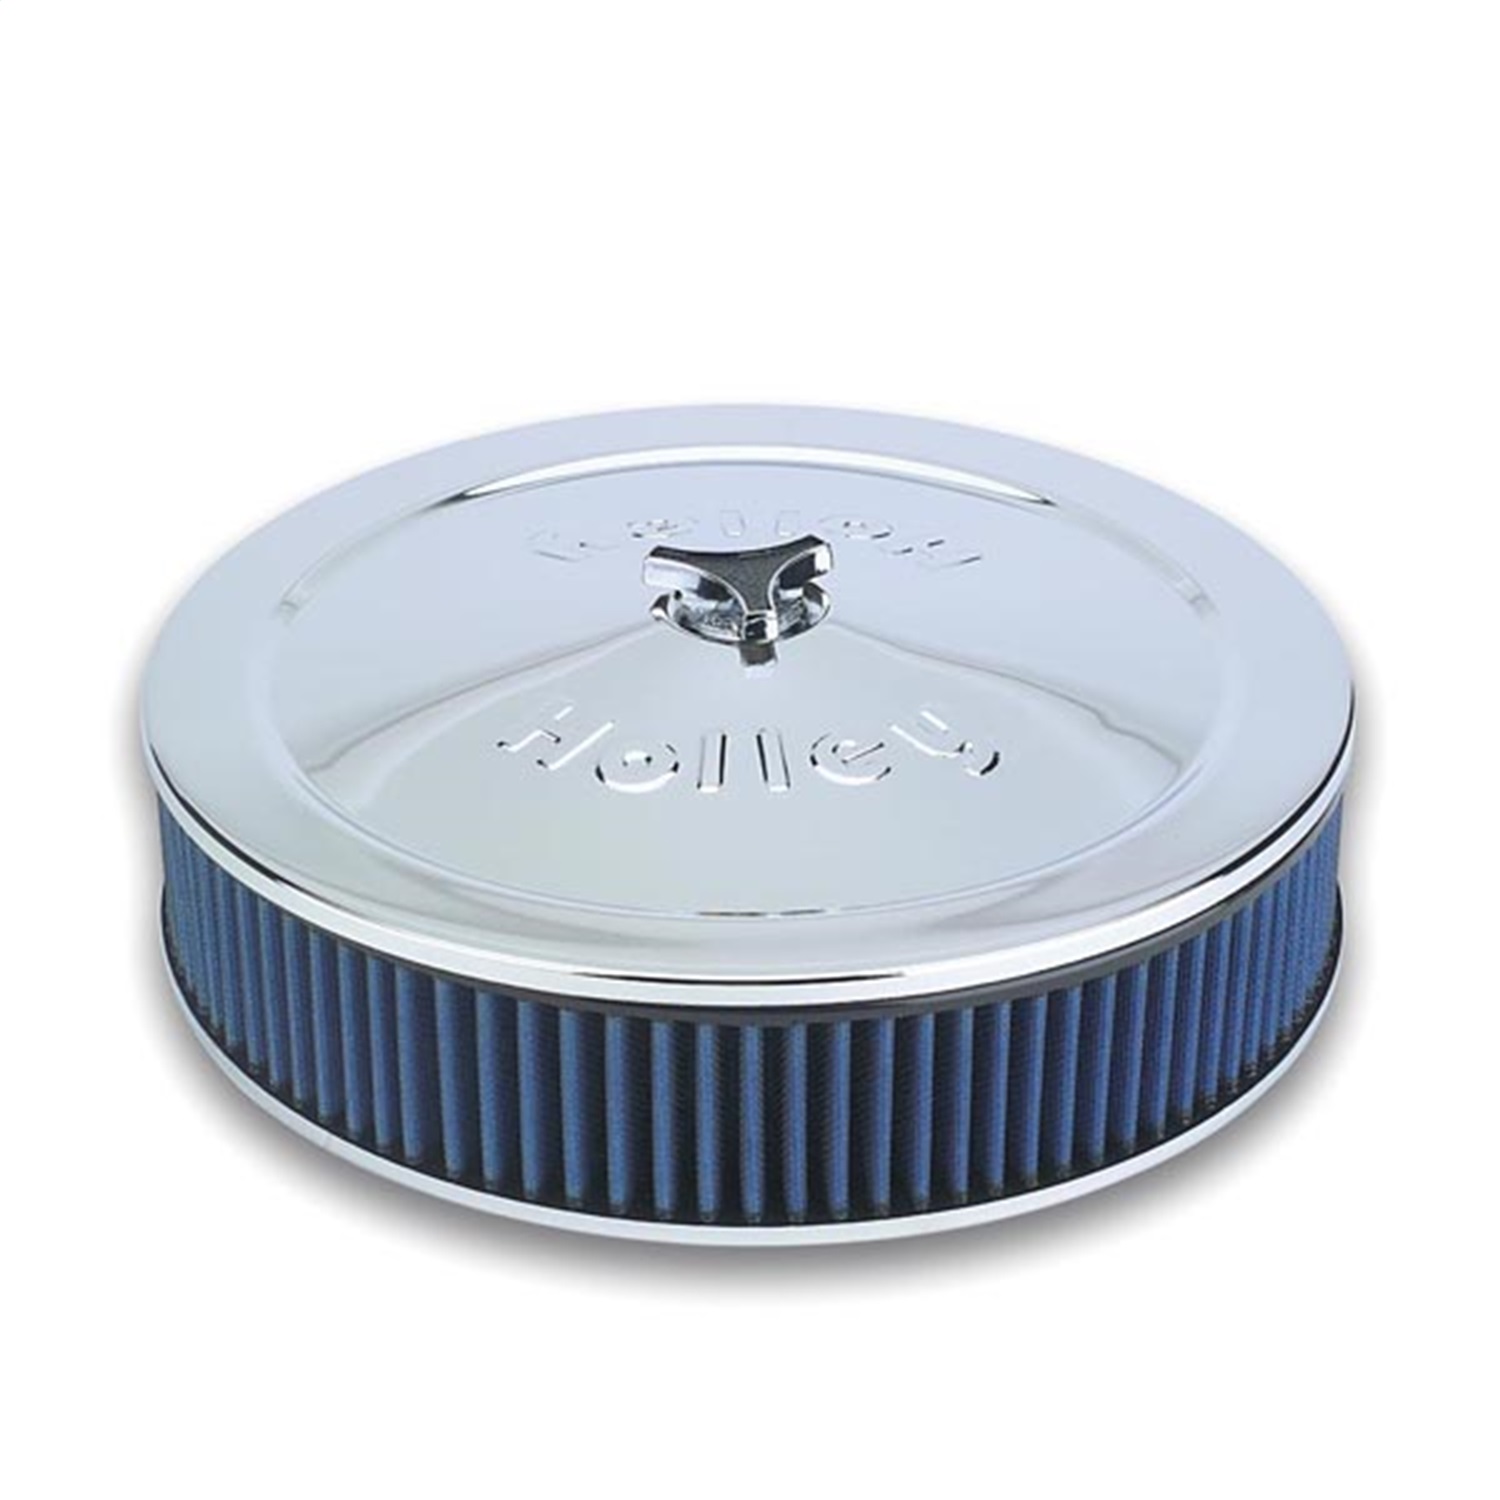 Holley Performance Holley Performance 120-146 Power Shot Air Cleaner